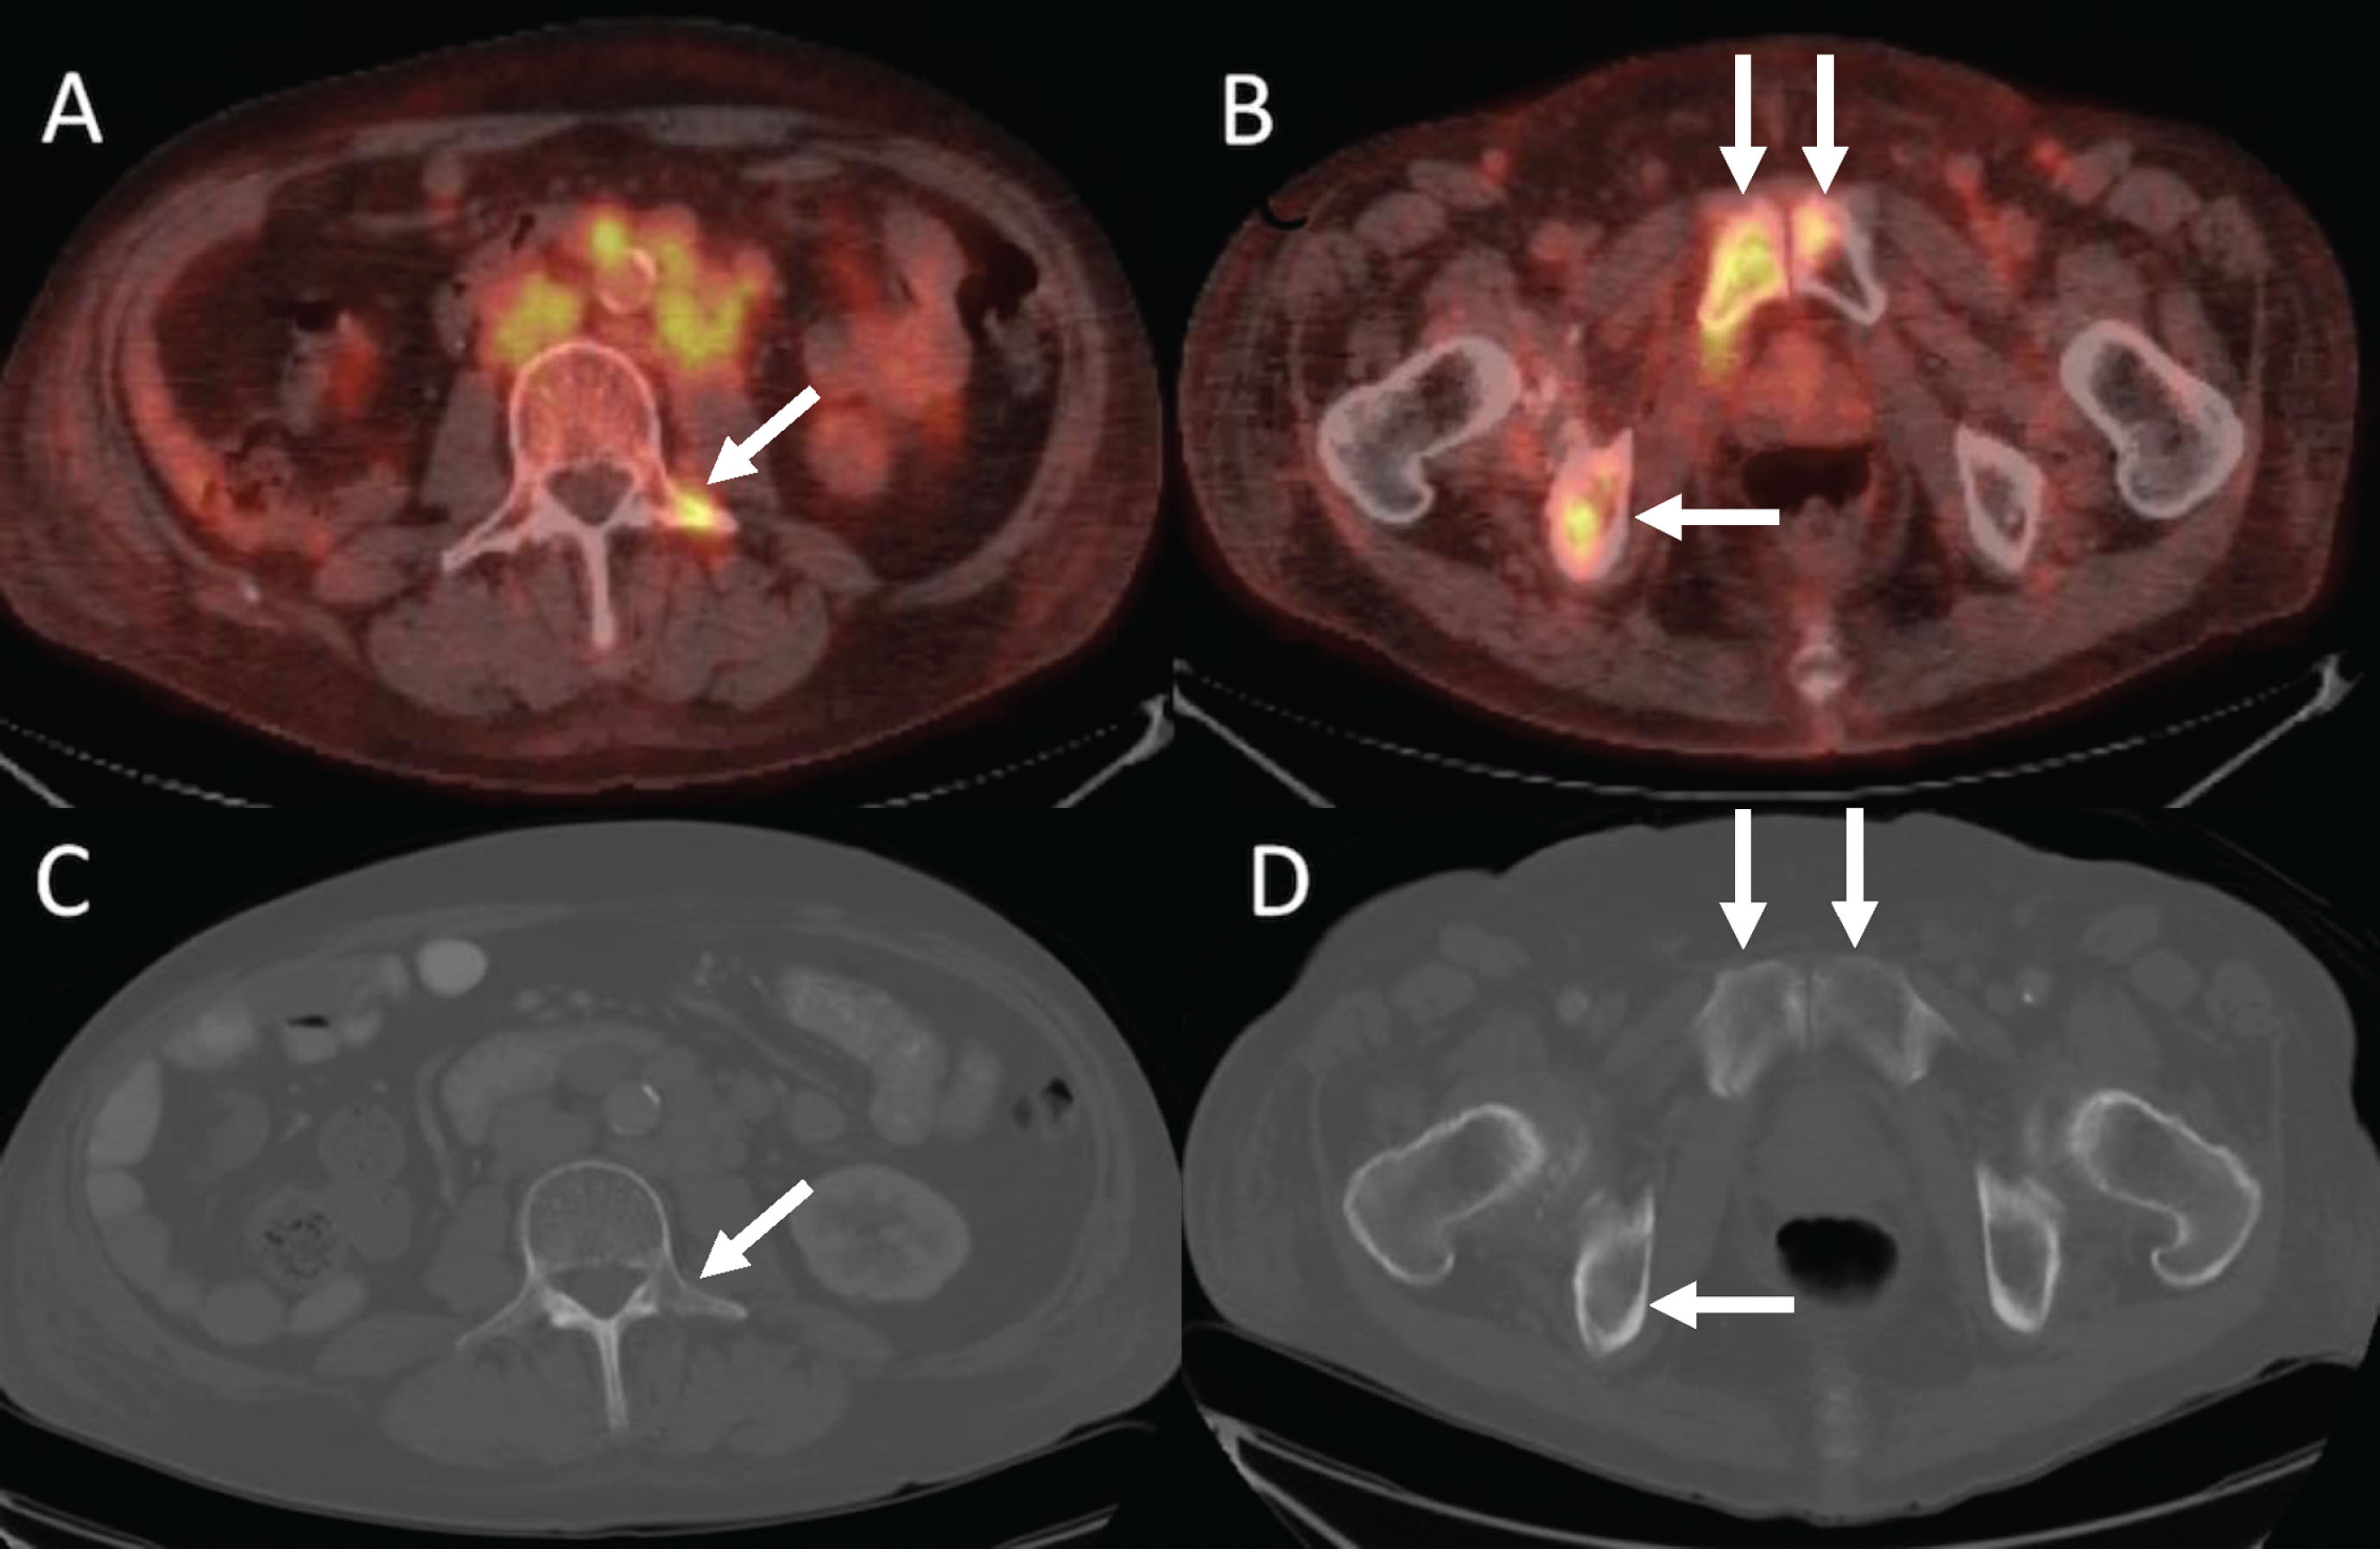 42-year-old man with metastatic renal cell carcinoma. Baseline PET/CT imaging shows osseous metastases at (A) L3 (arrow) and (B) in the pubic bones (arrows). CT does not show the metastatic lesions at L3 (C, arrow) or in the pubic bones (D, arrows).